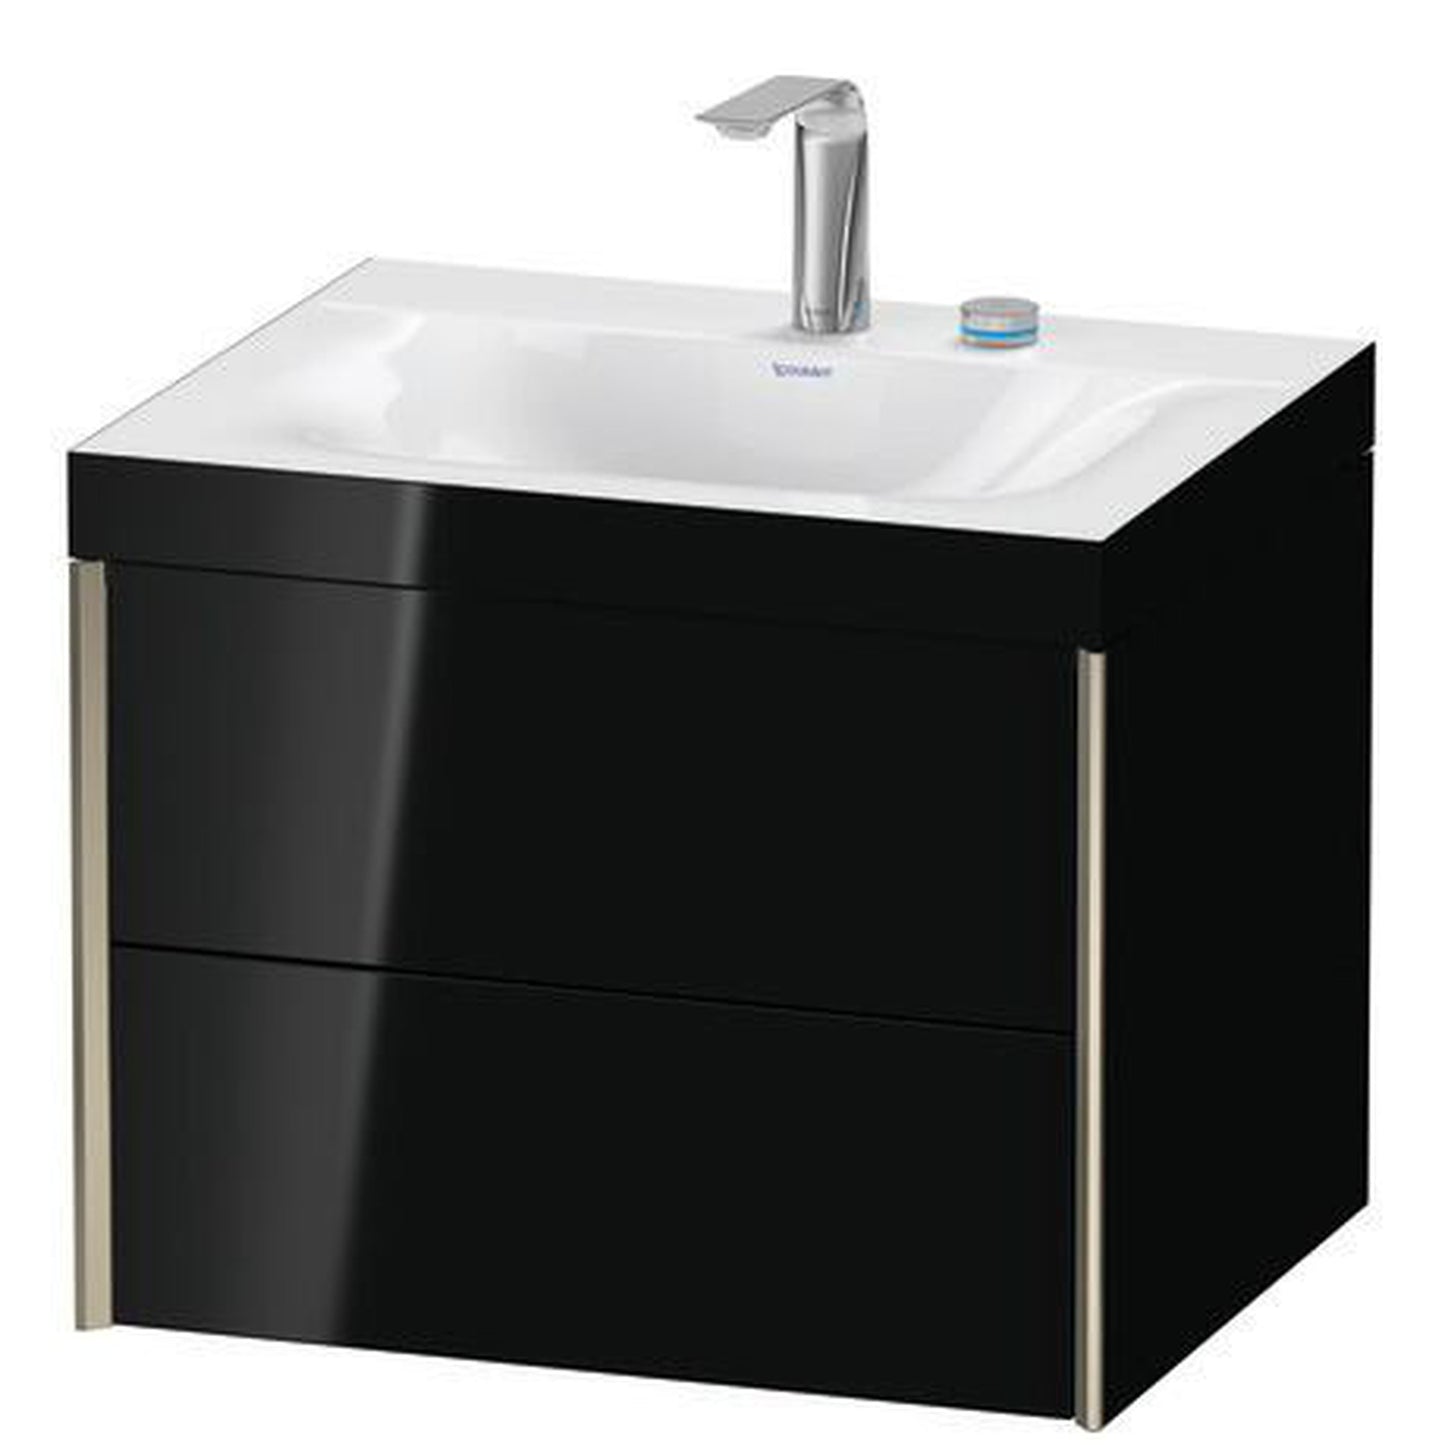 Duravit Xviu 24" x 20" x 19" Two Drawer C-Bonded Wall-Mount Vanity Kit With Two Tap Holes, Black (XV4614EB140C)